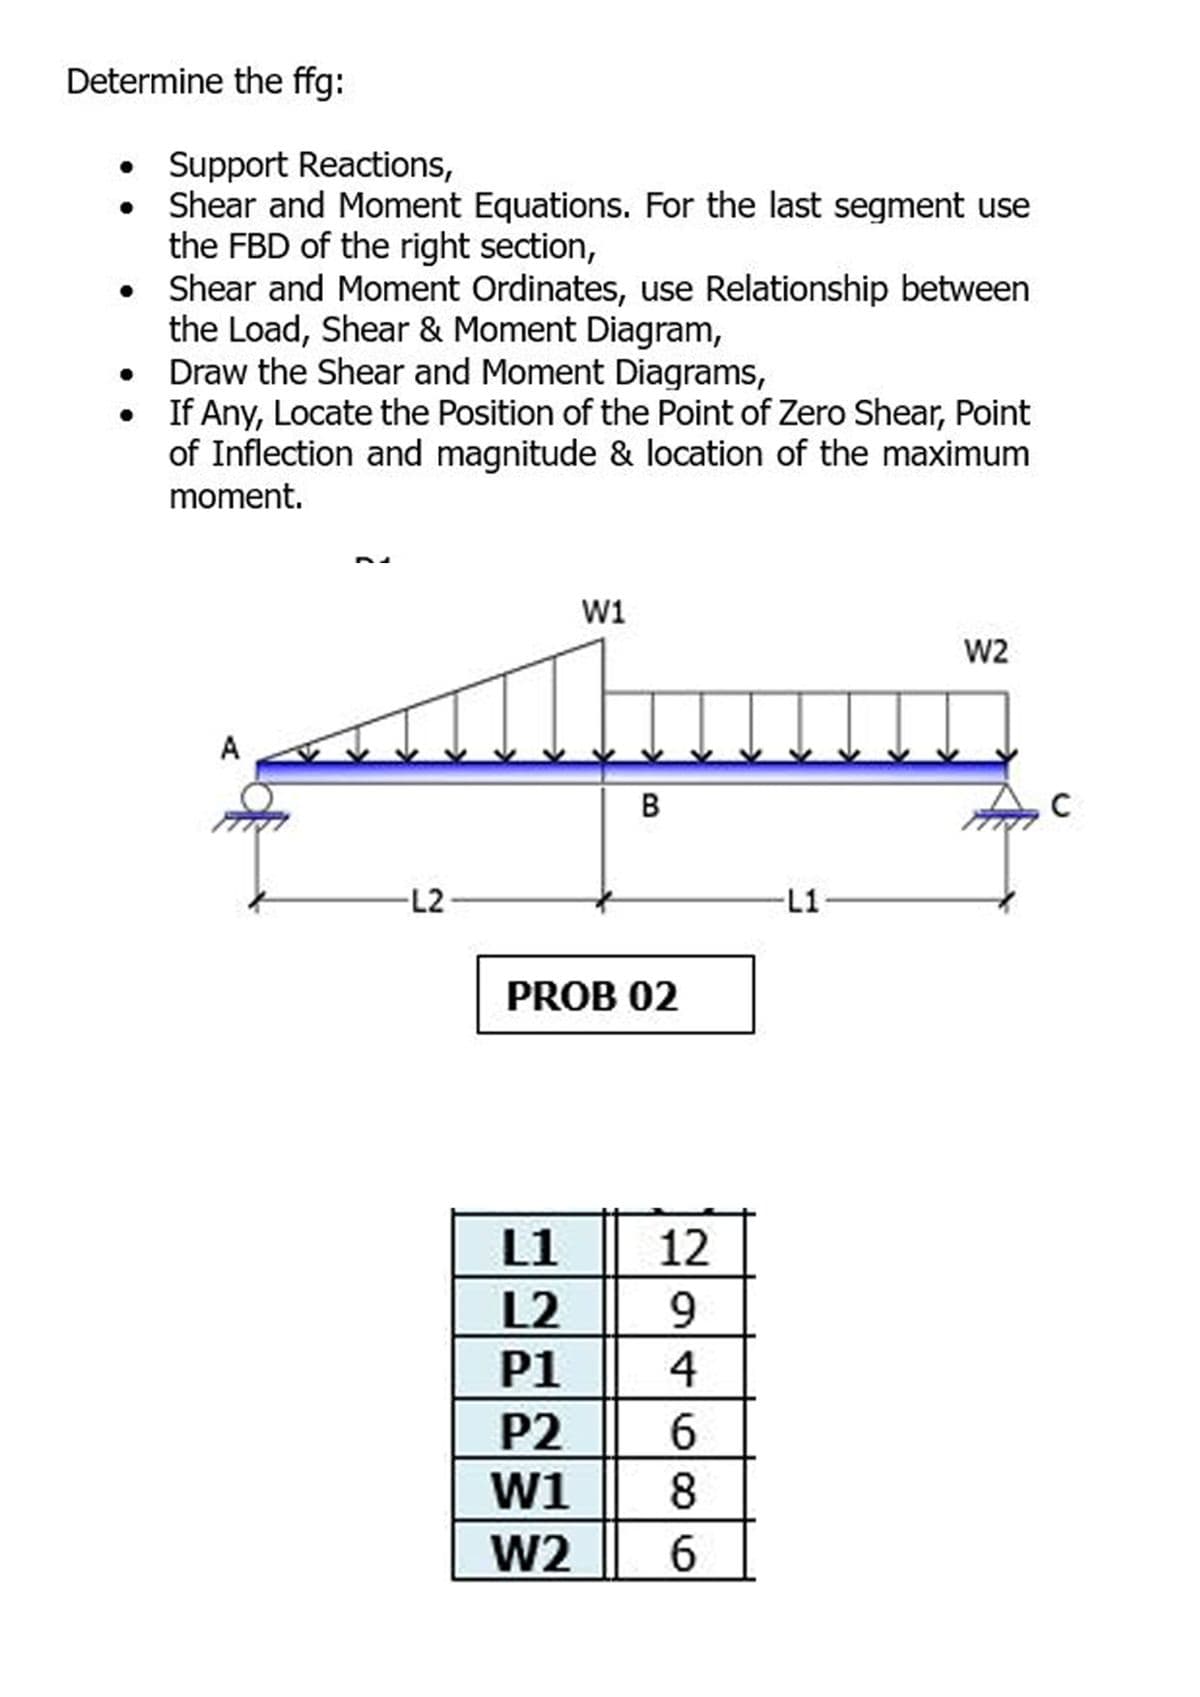 Determine the ffg:
Support Reactions,
•
Shear and Moment Equations. For the last segment use
the FBD of the right section,
•
Shear and Moment Ordinates, use Relationship between
the Load, Shear & Moment Diagram,
•
Draw the Shear and Moment Diagrams,
If Any, Locate the Position of the Point of Zero Shear, Point
of Inflection and magnitude & location of the maximum
moment.
لللللهلللقمر
A
W1
-L2-
B
PROB 02
L1
12
L2
9
P1
4
P2
6
W1
8
W2 6
-L1-
W2
C